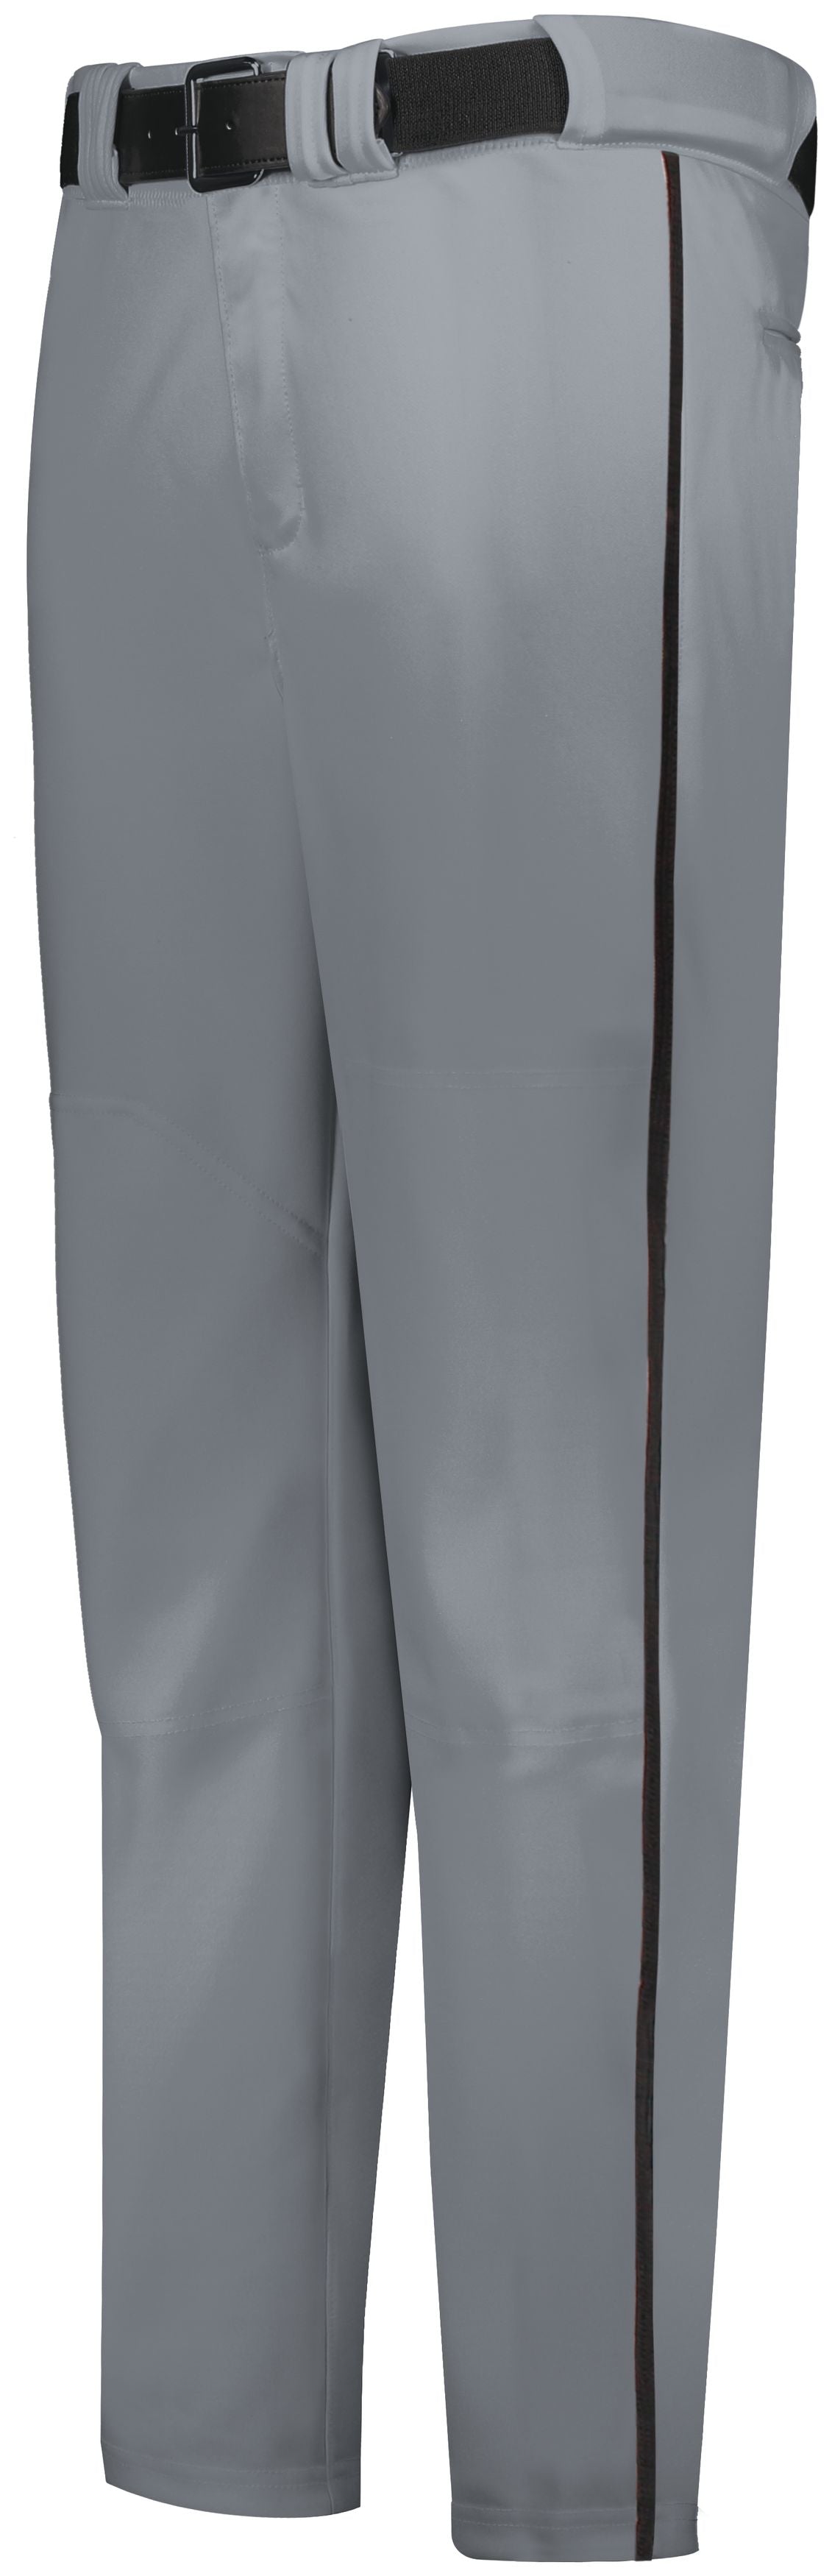 Piped Change Up Baseball Pant - R14DBM